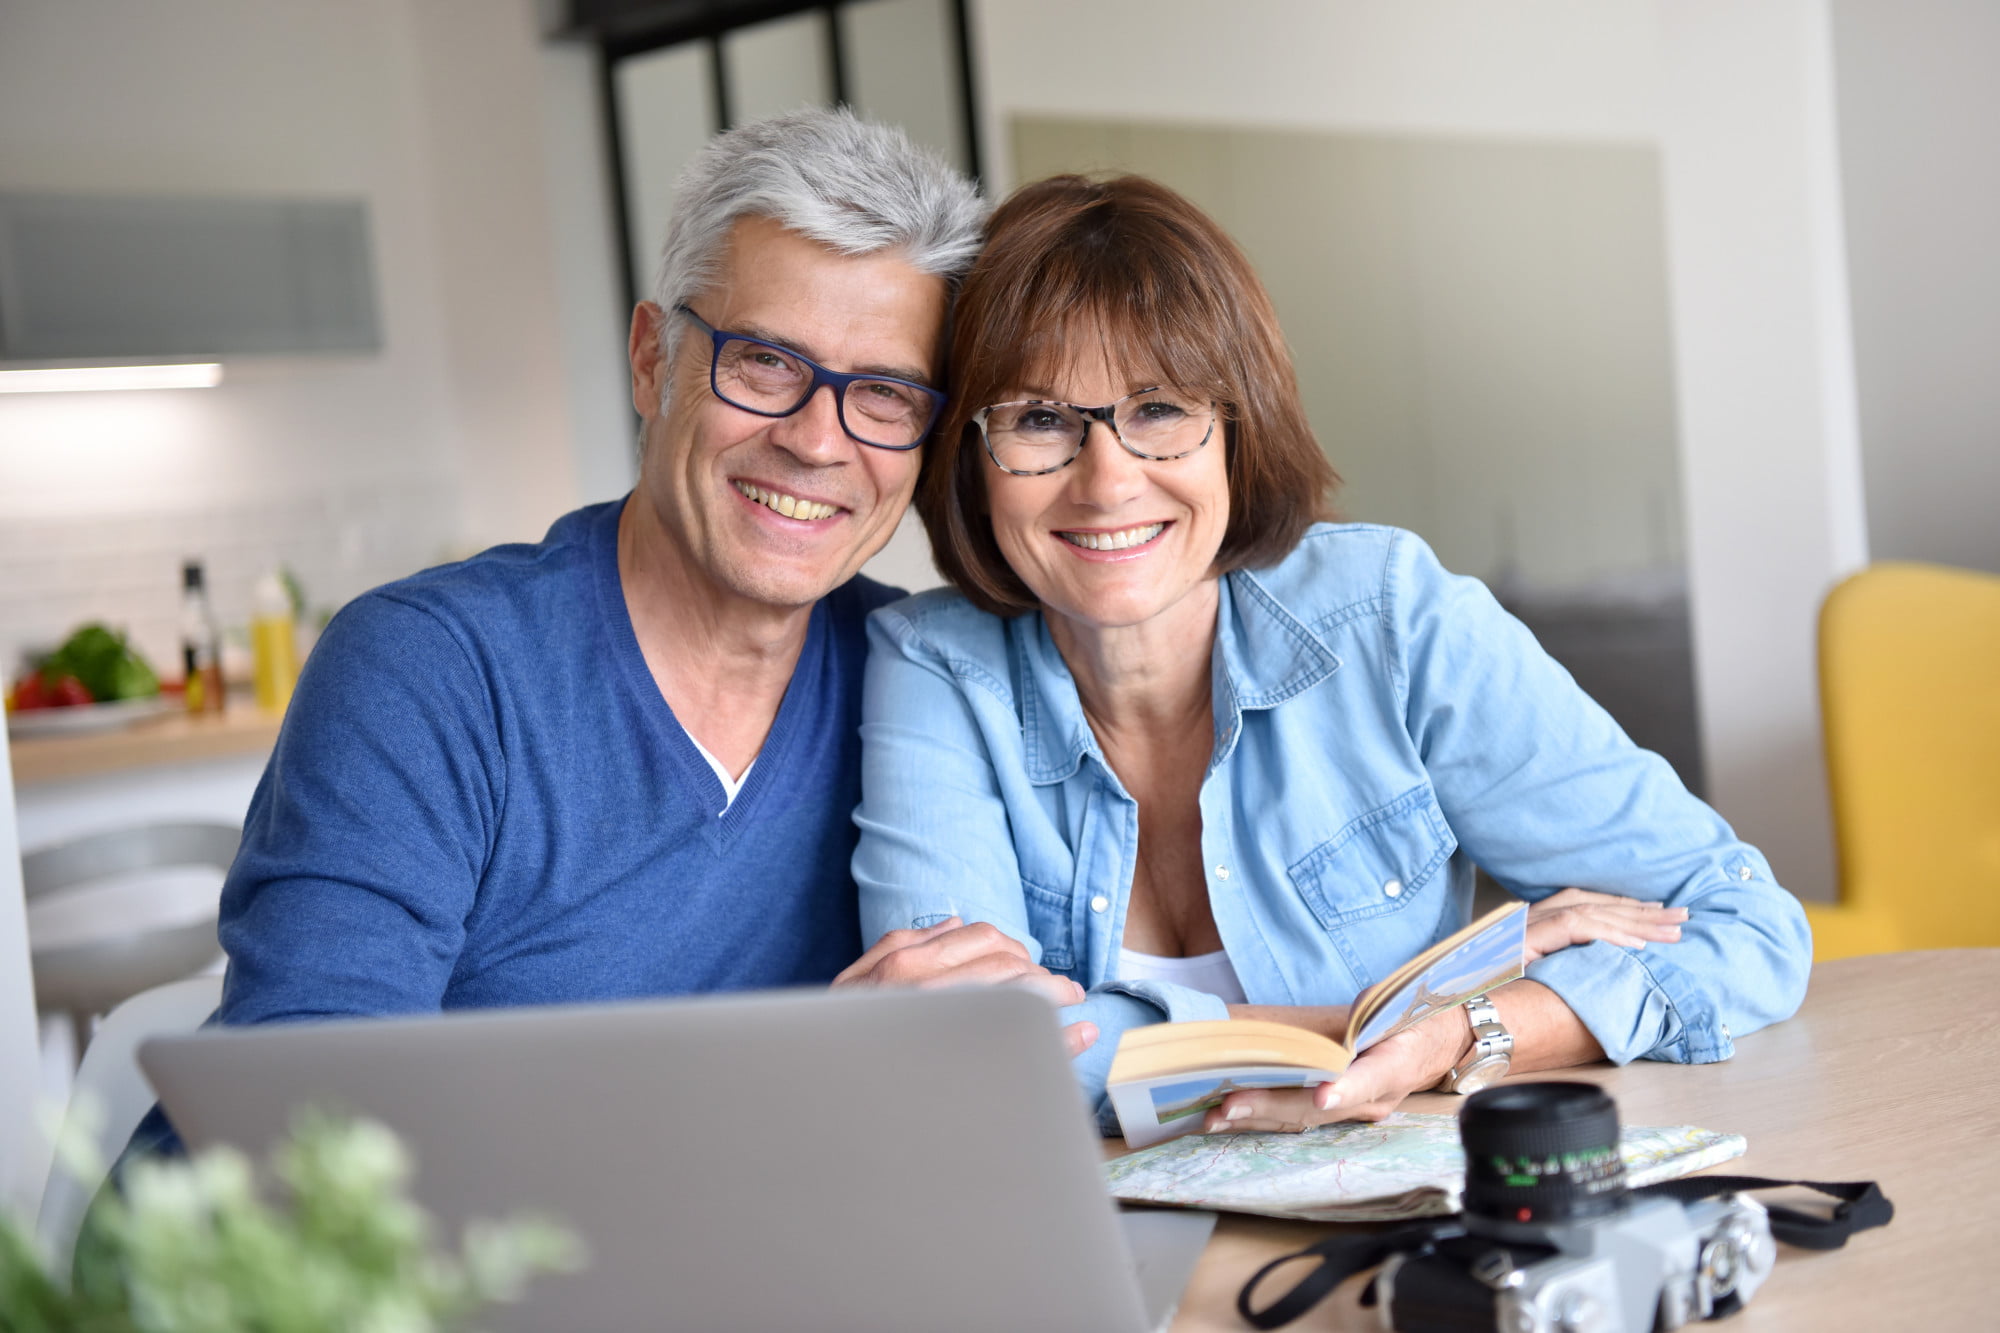 It is never too early to begin preparing your finances for your retirement. Check out these 5 helpful retirement planning tips to help you get started.